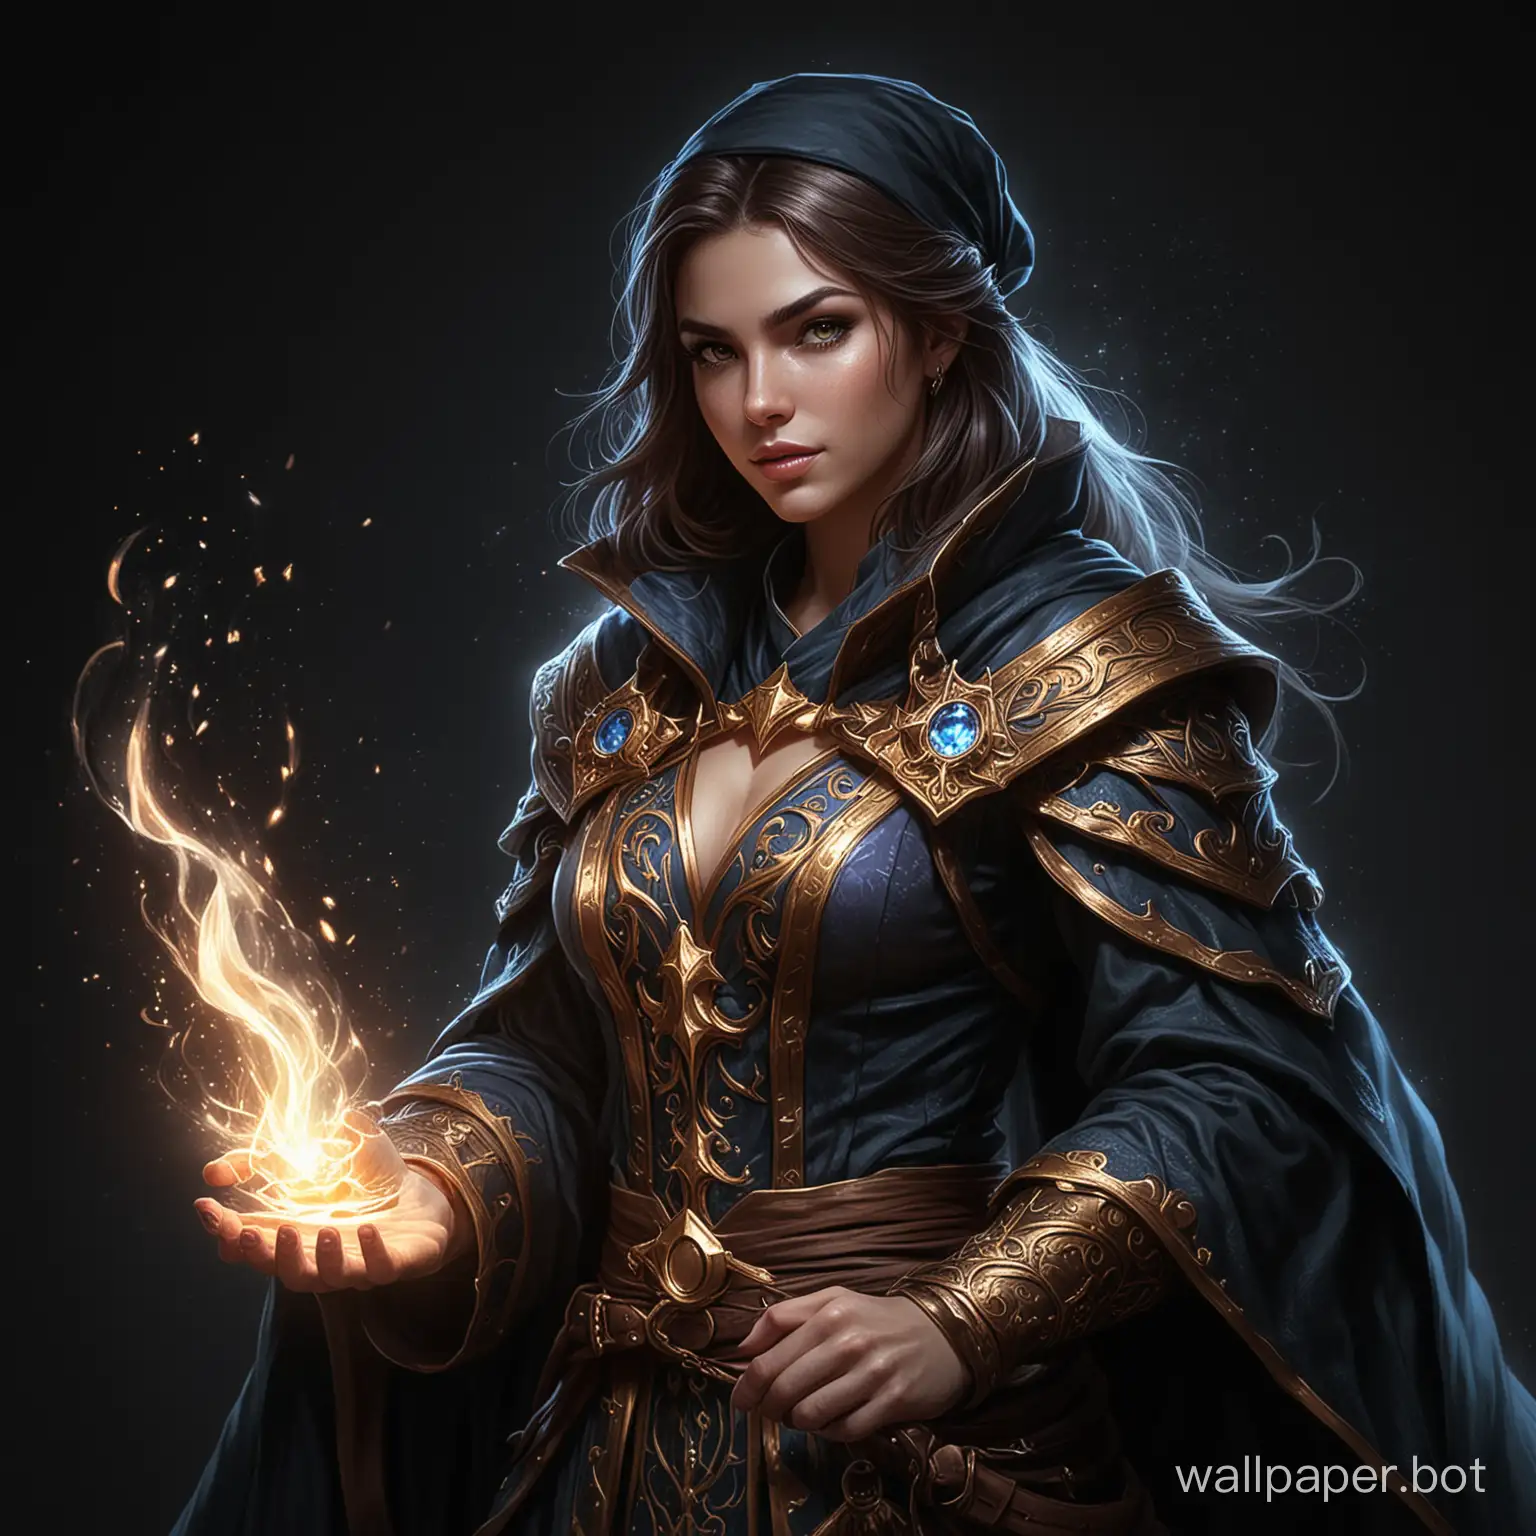 Draw a fantasy mage who shines brightly on a black background.